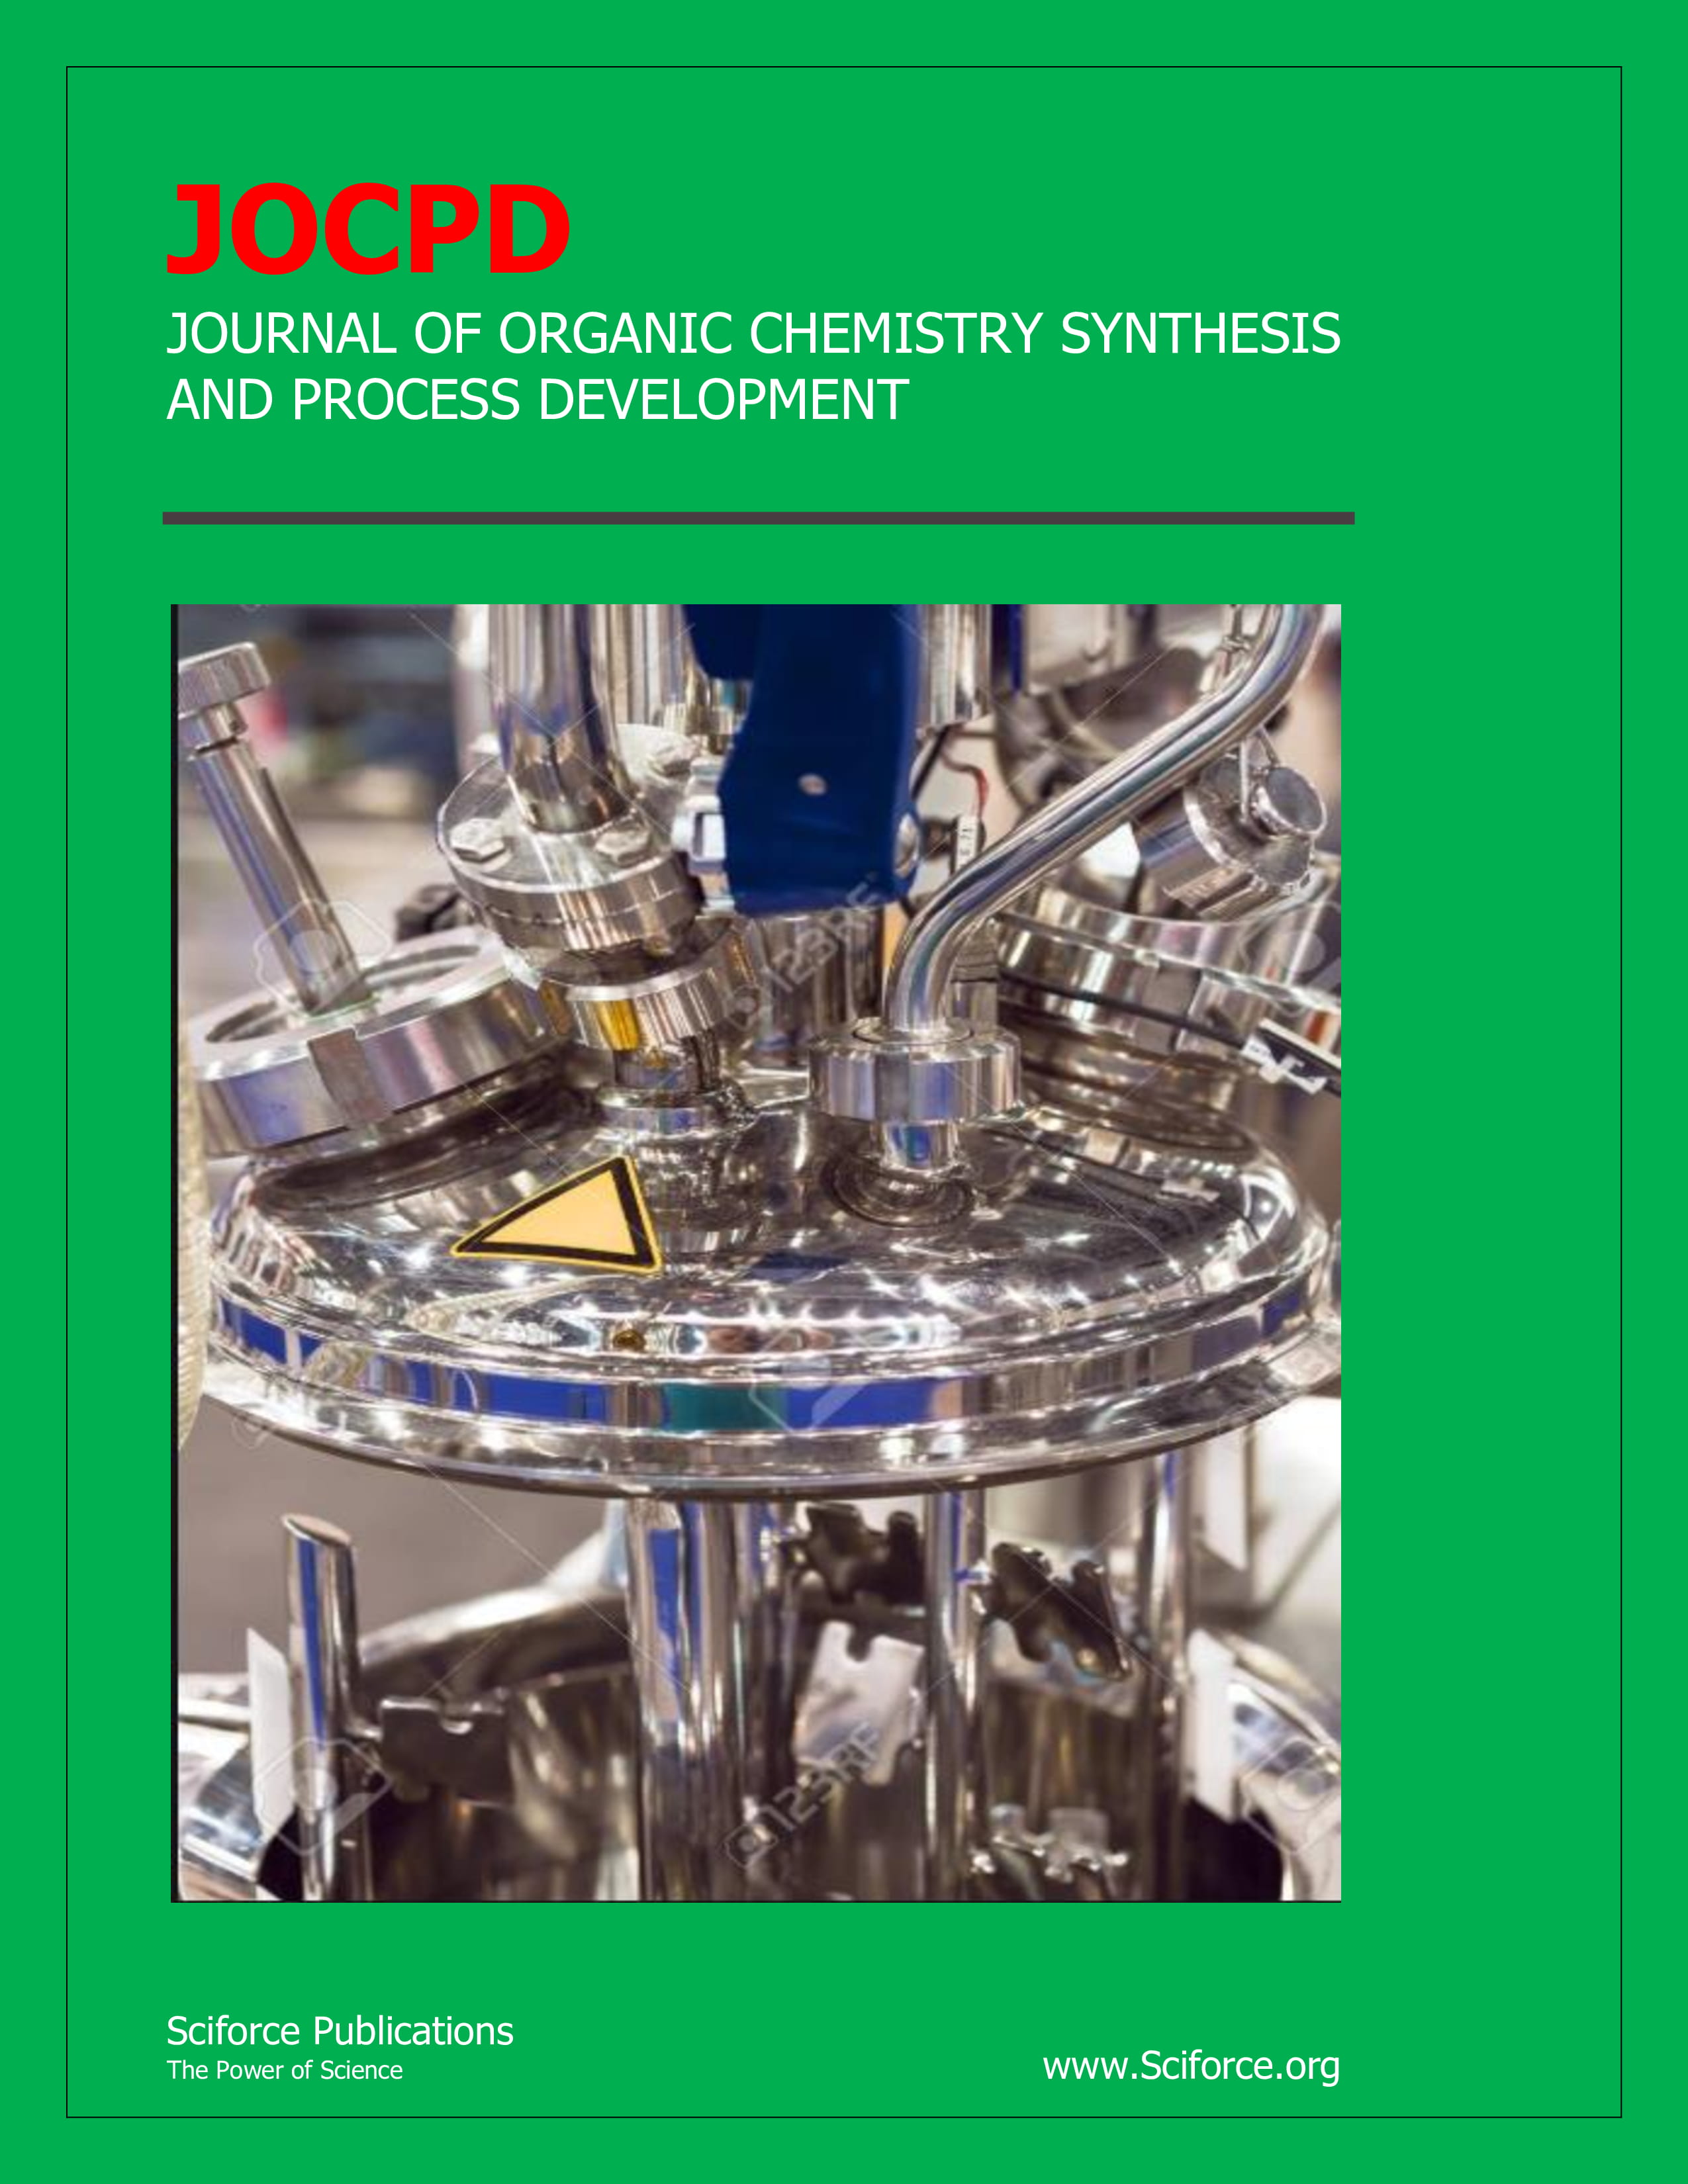 Journal of Organic Chemistry: Synthesis and Process Development